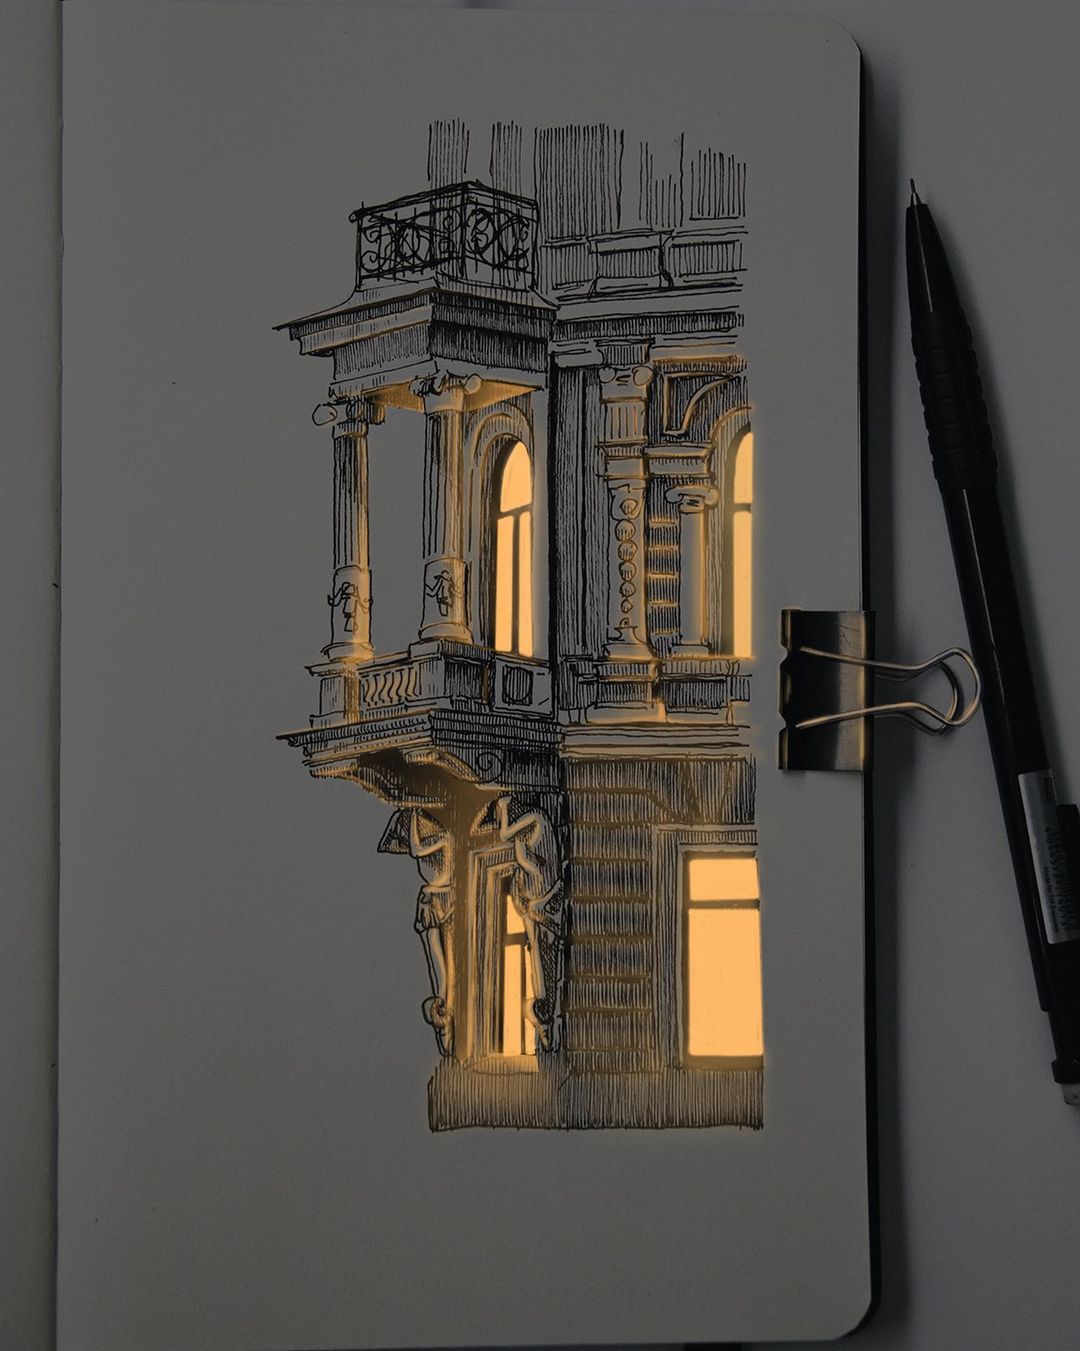 Glowing Archisketch Gorgeously Illuminated Architectural Sketches By Nikita Busyak 15